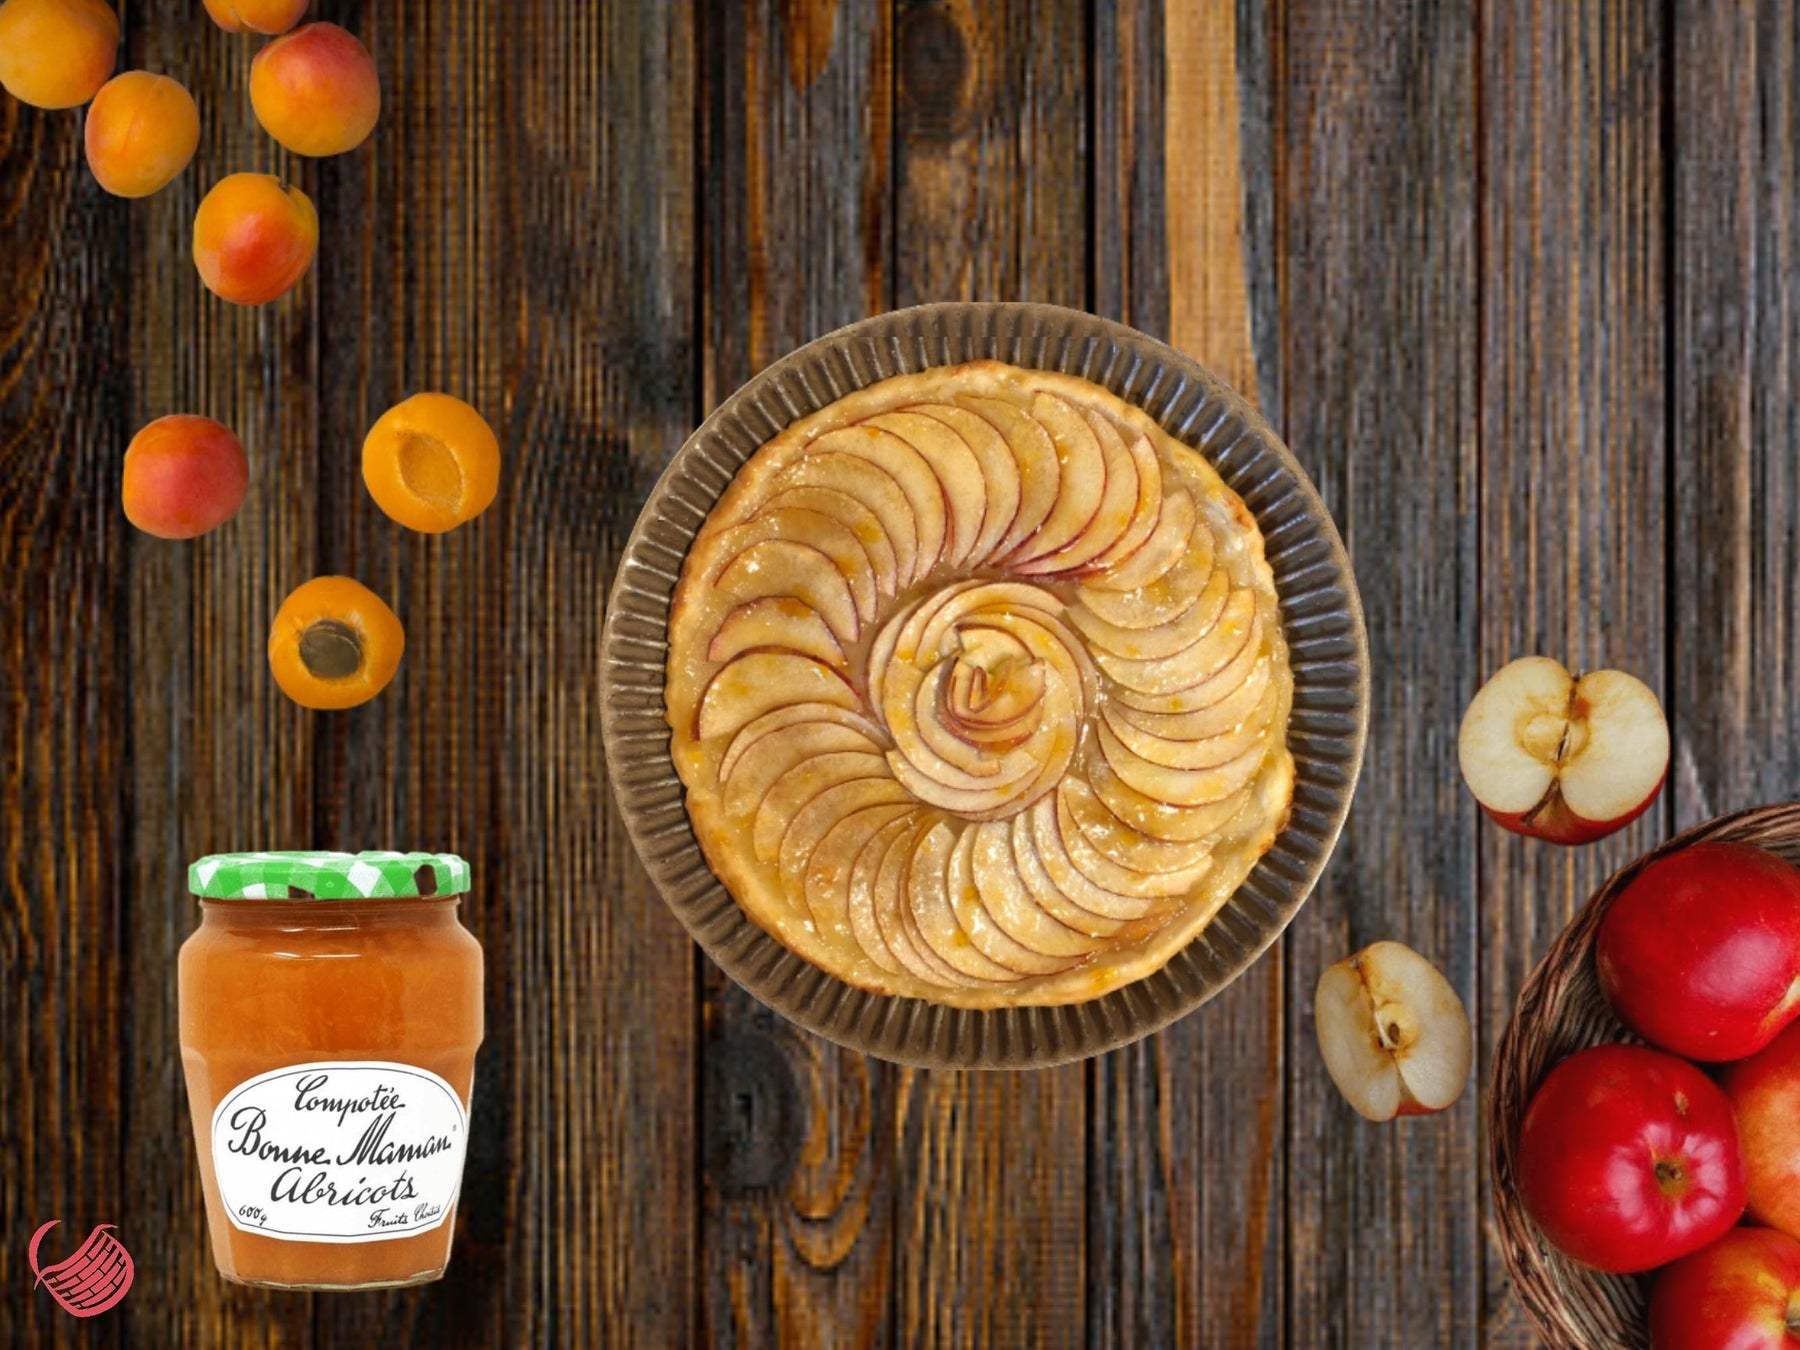 How to Use Bonne Maman Apricot "Compote" in Your French Apple Tart Recipe